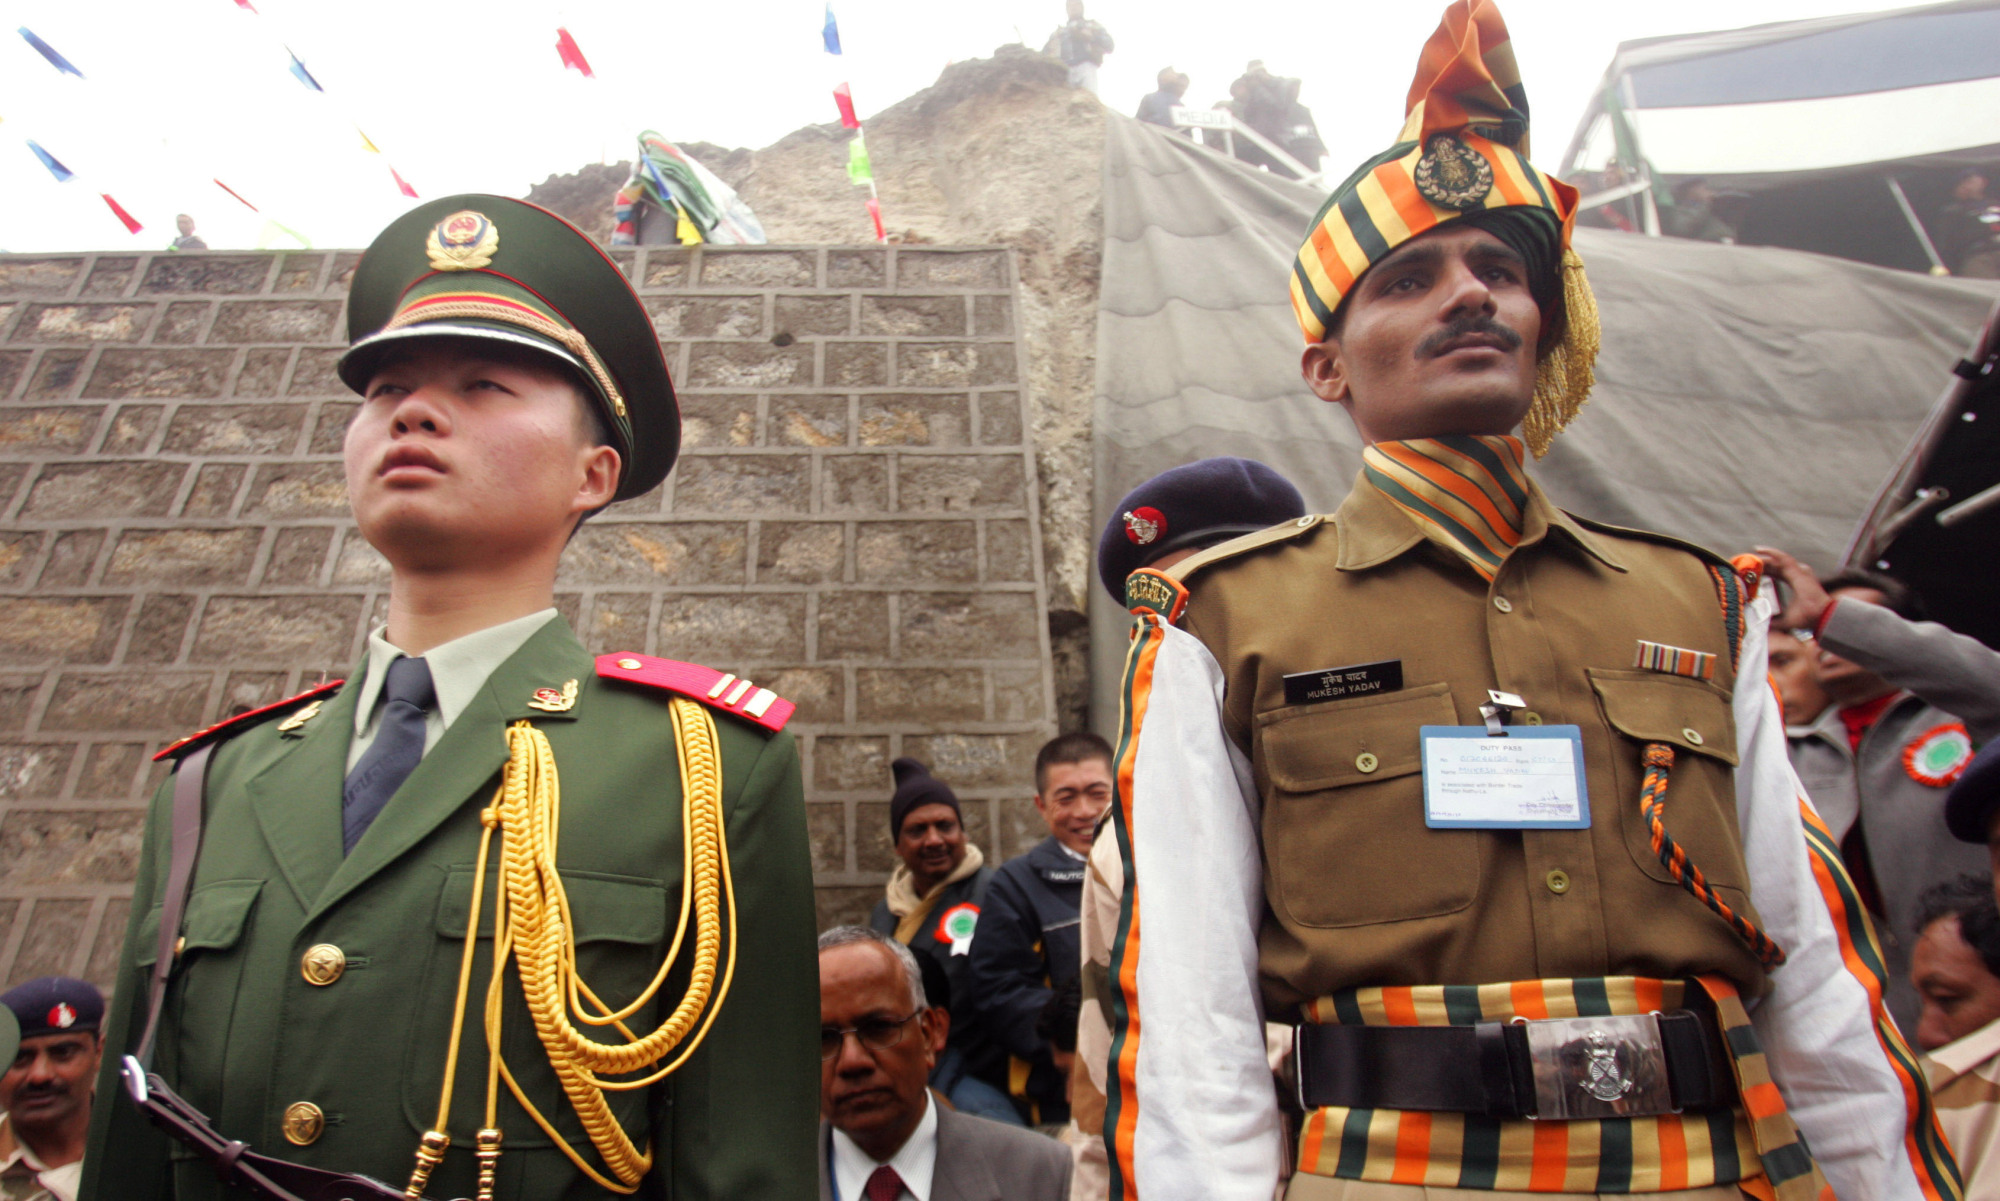 A Chinese soldier and an Indian soldier maintain ceremonial positions marking the borders of their respective countries at the 2006 opening of the Nathu La pass in the northeastern Indian state of Sikkim, which had been closed following military clashes between China and India in 1967. Border tensions are rising  once again between the two Asian giants. | AP